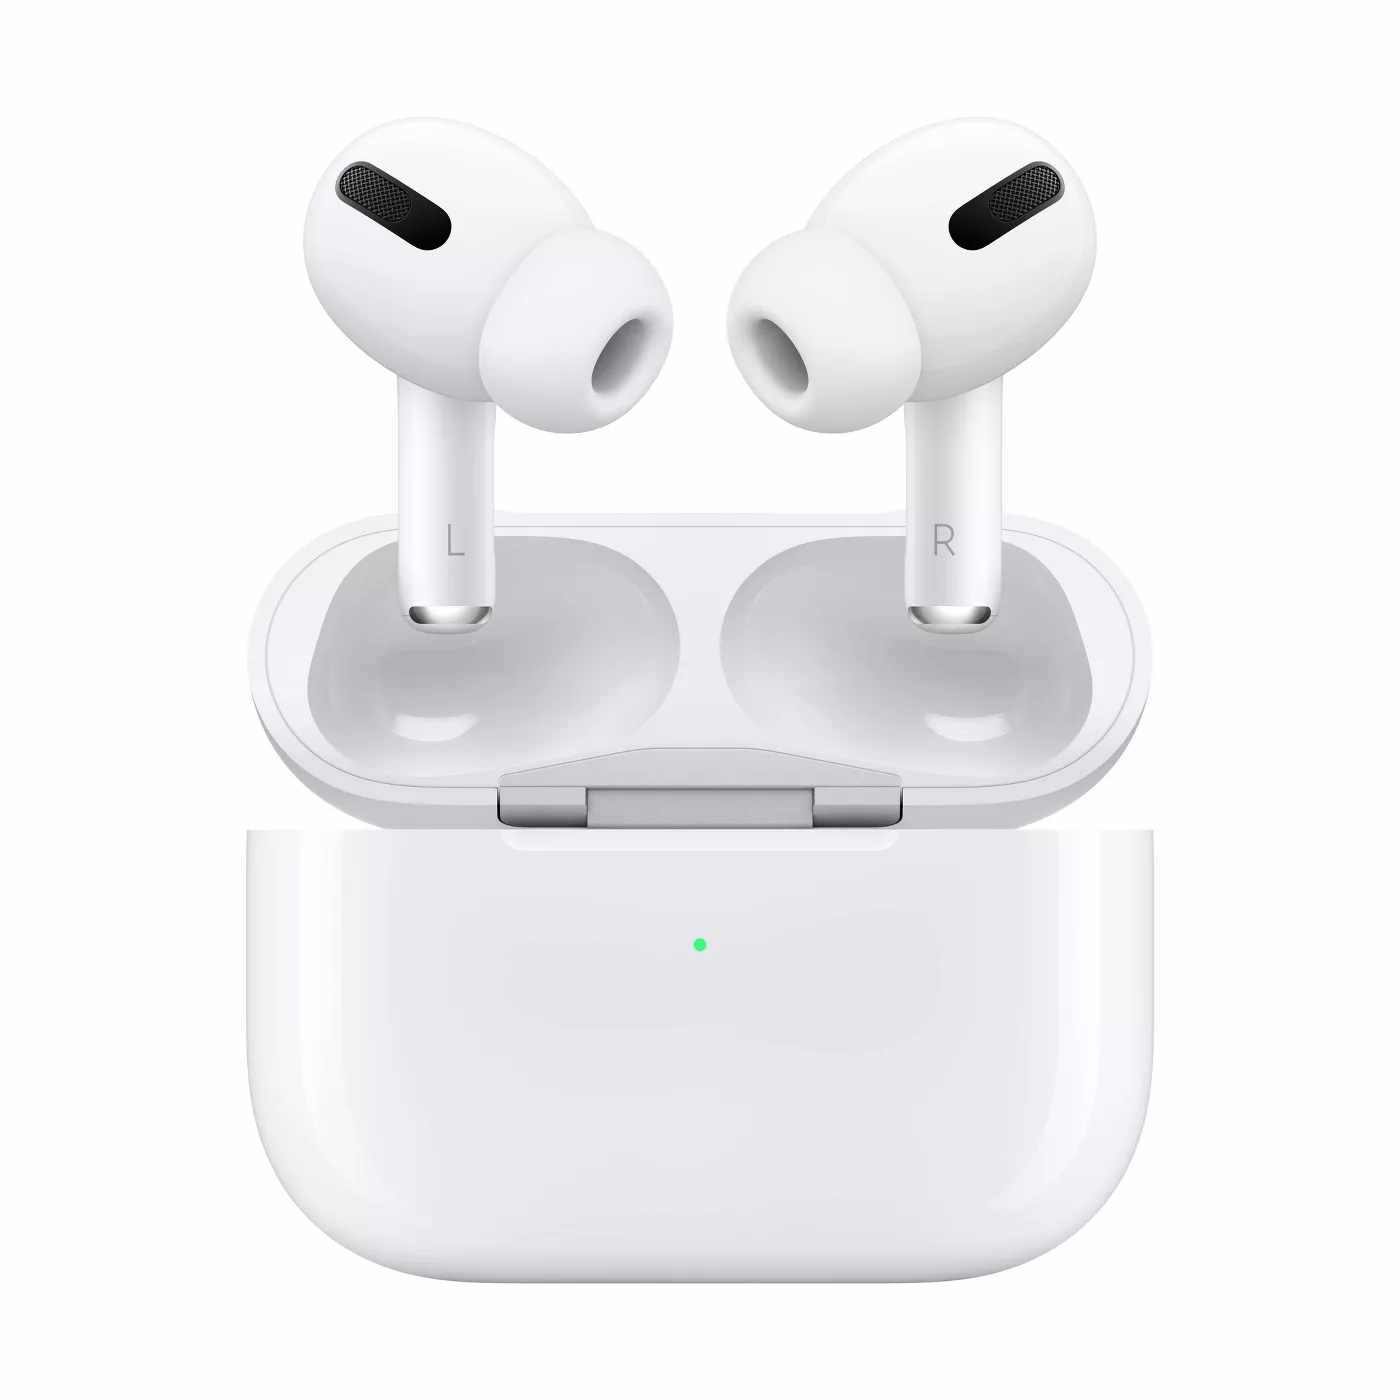 AppleAirpodsPro